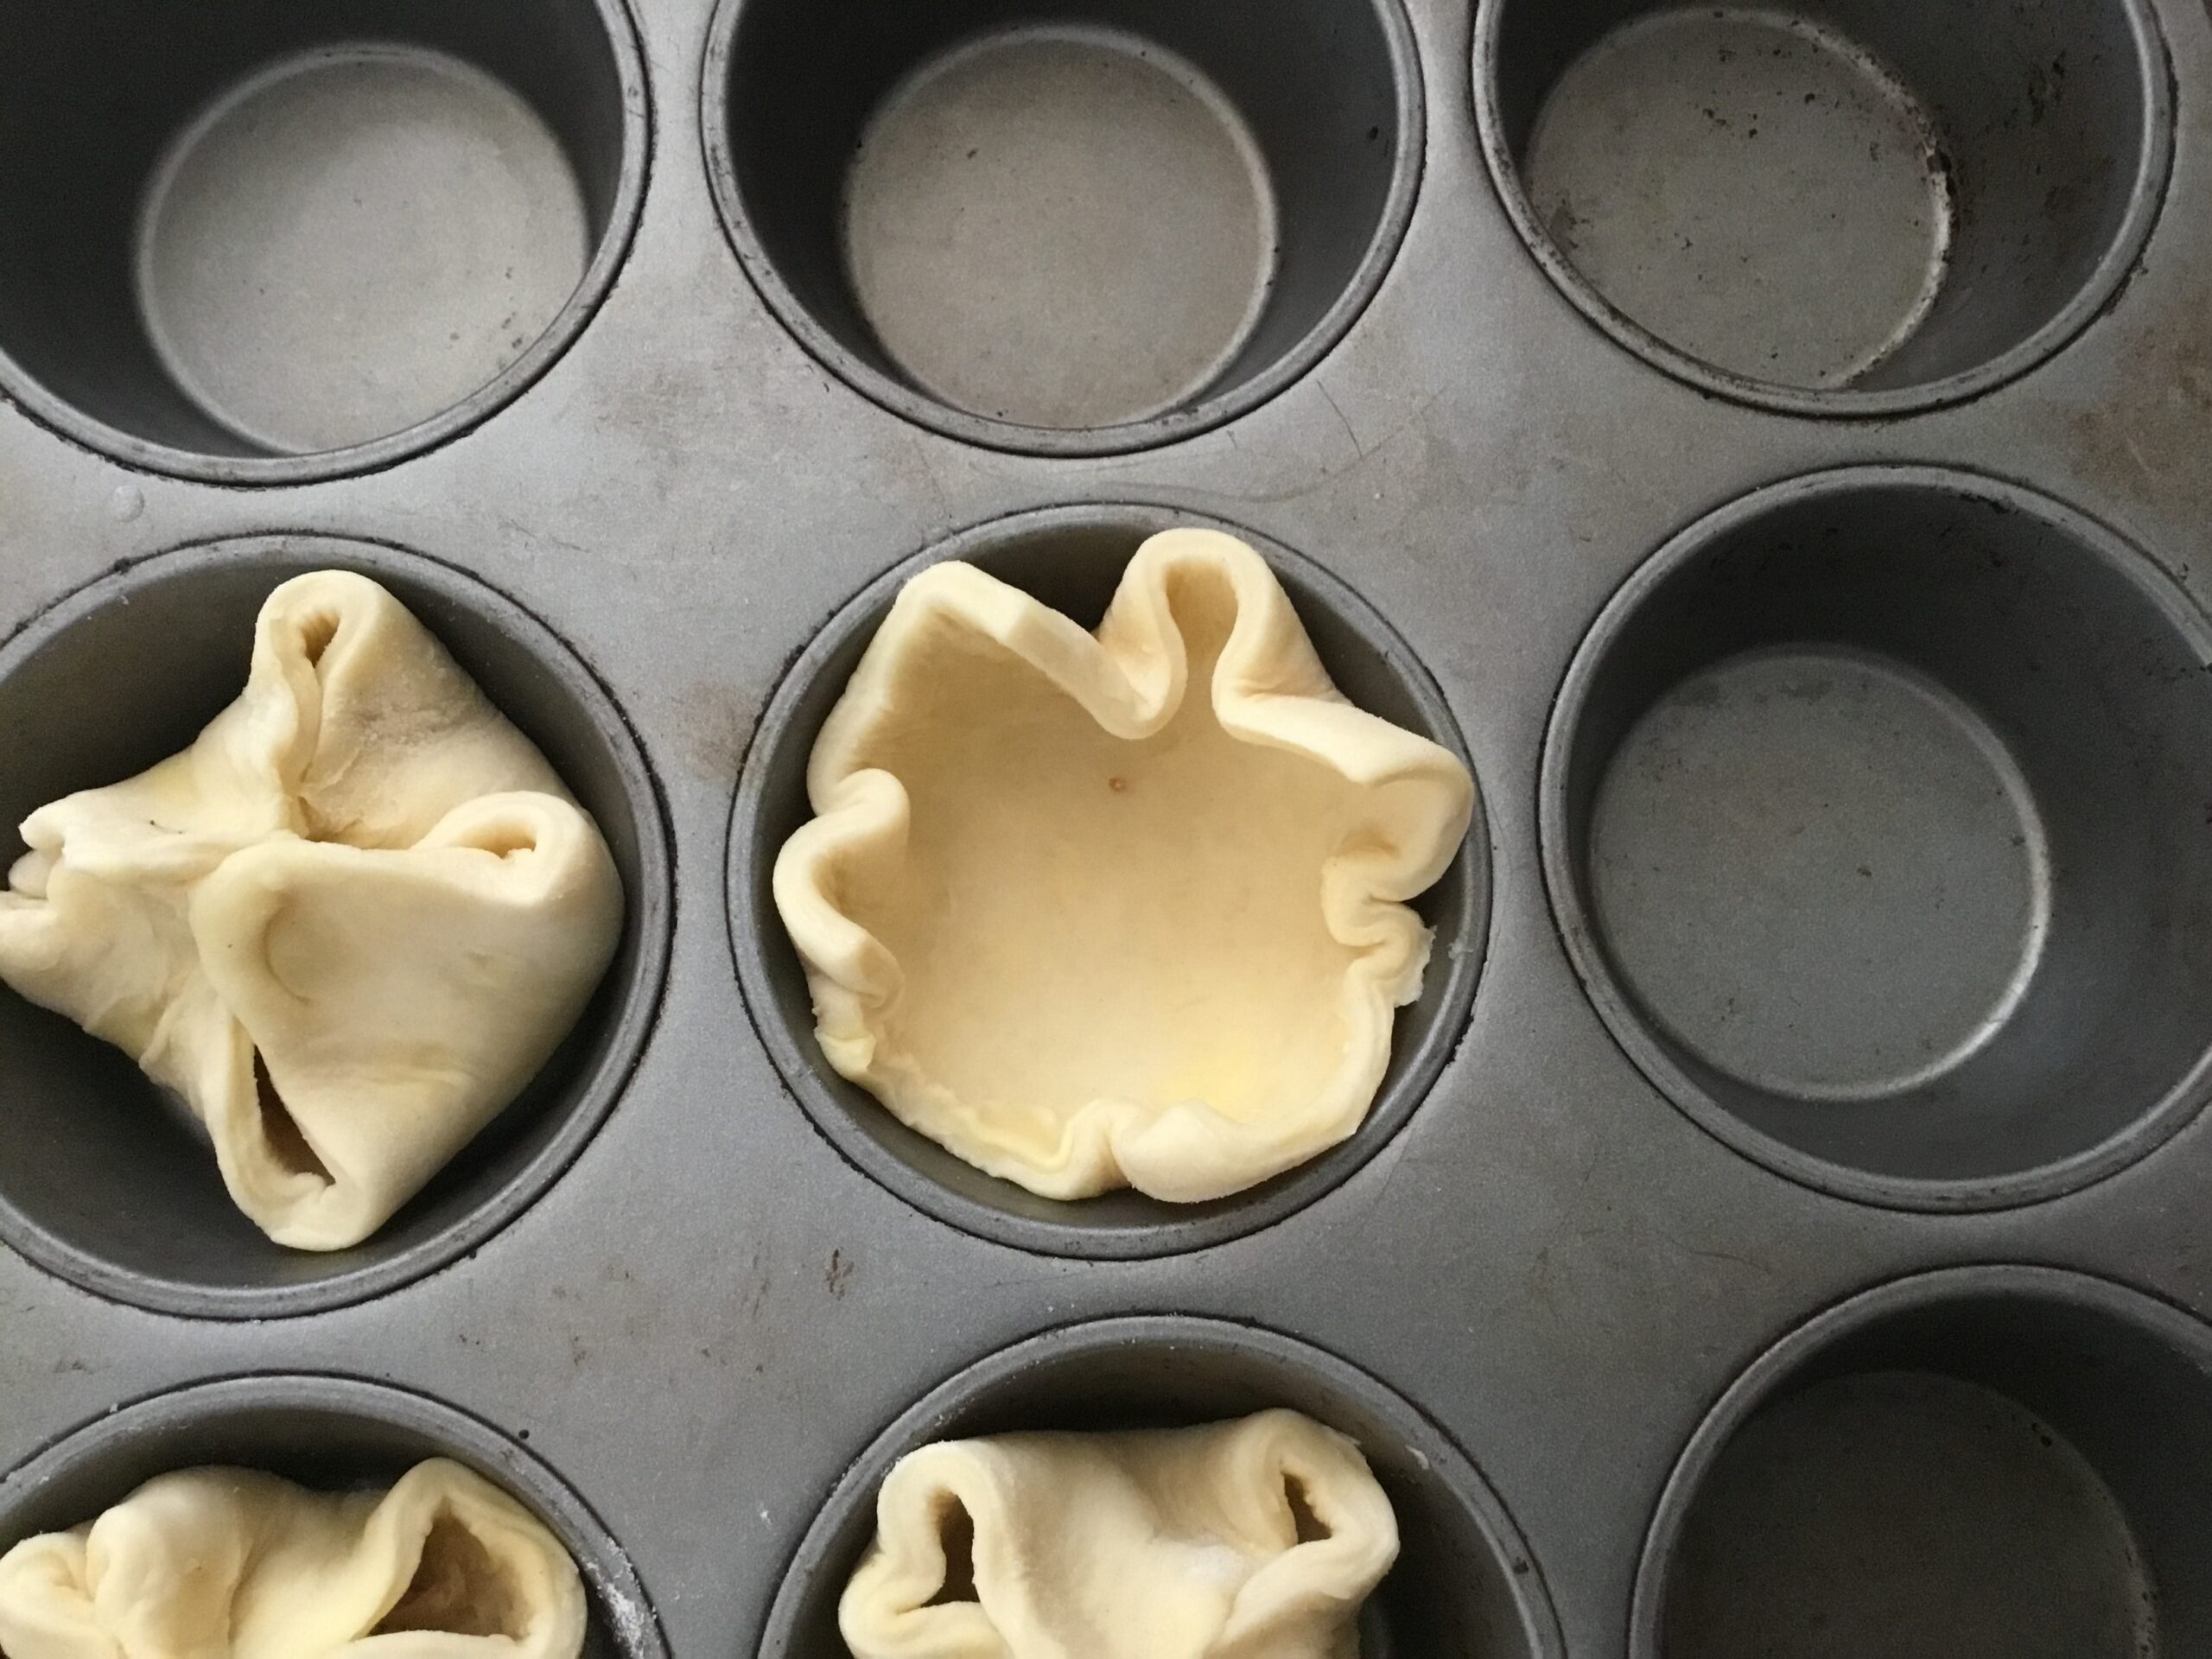 Pastry in muffin tins